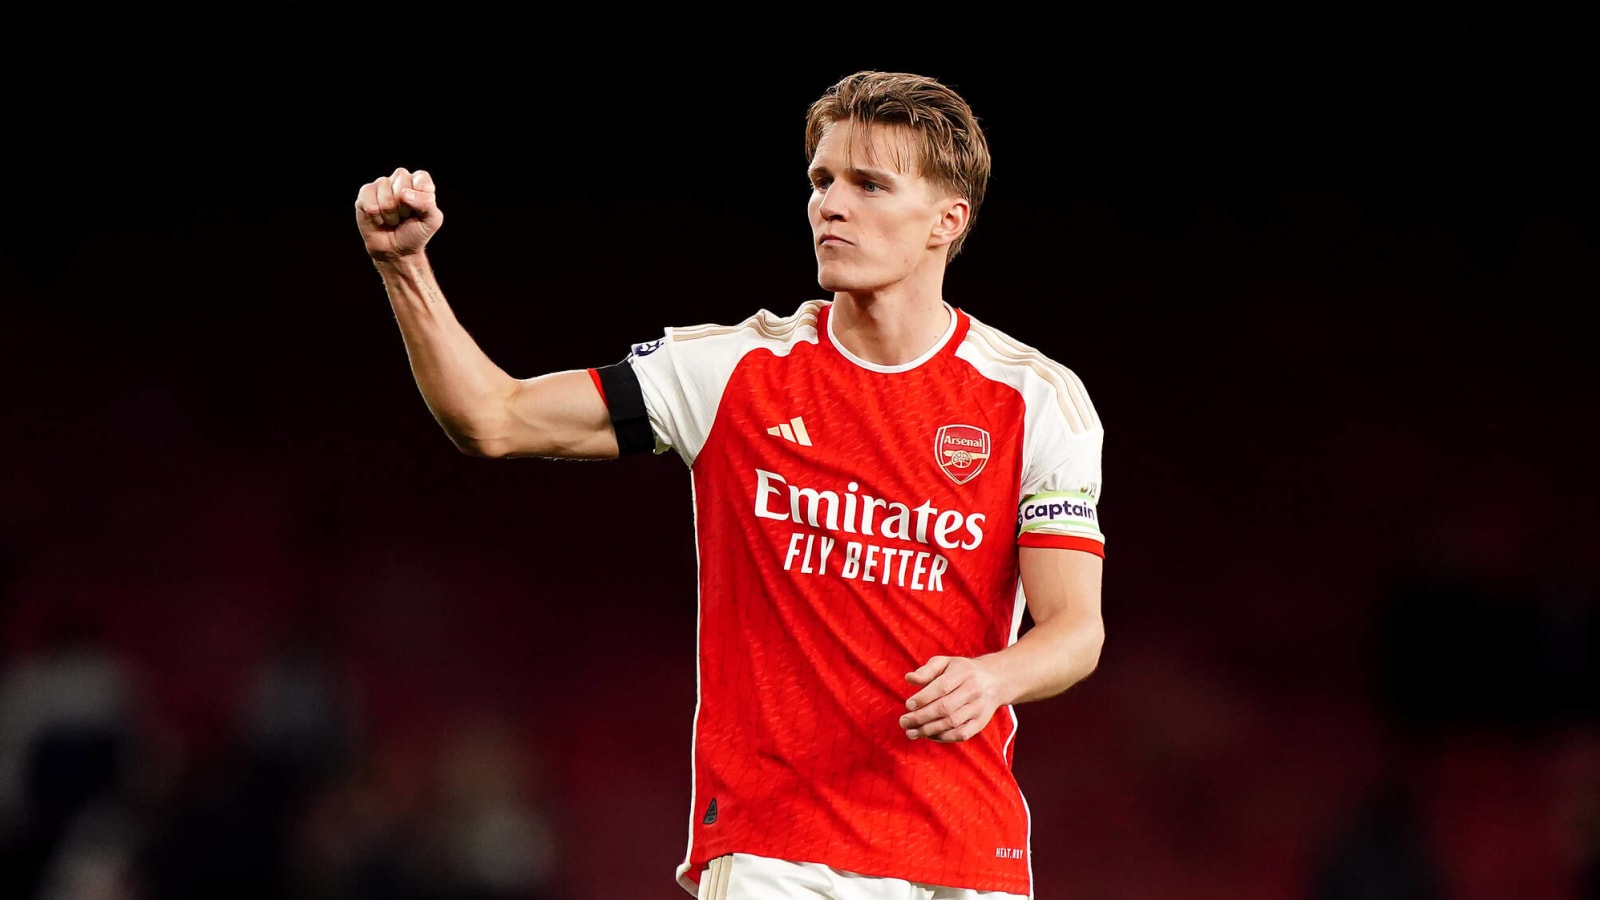 'Really strange atmosphere' – Arsenal’s Martin Odegaard takes a subtle dig at Tottenham supporters